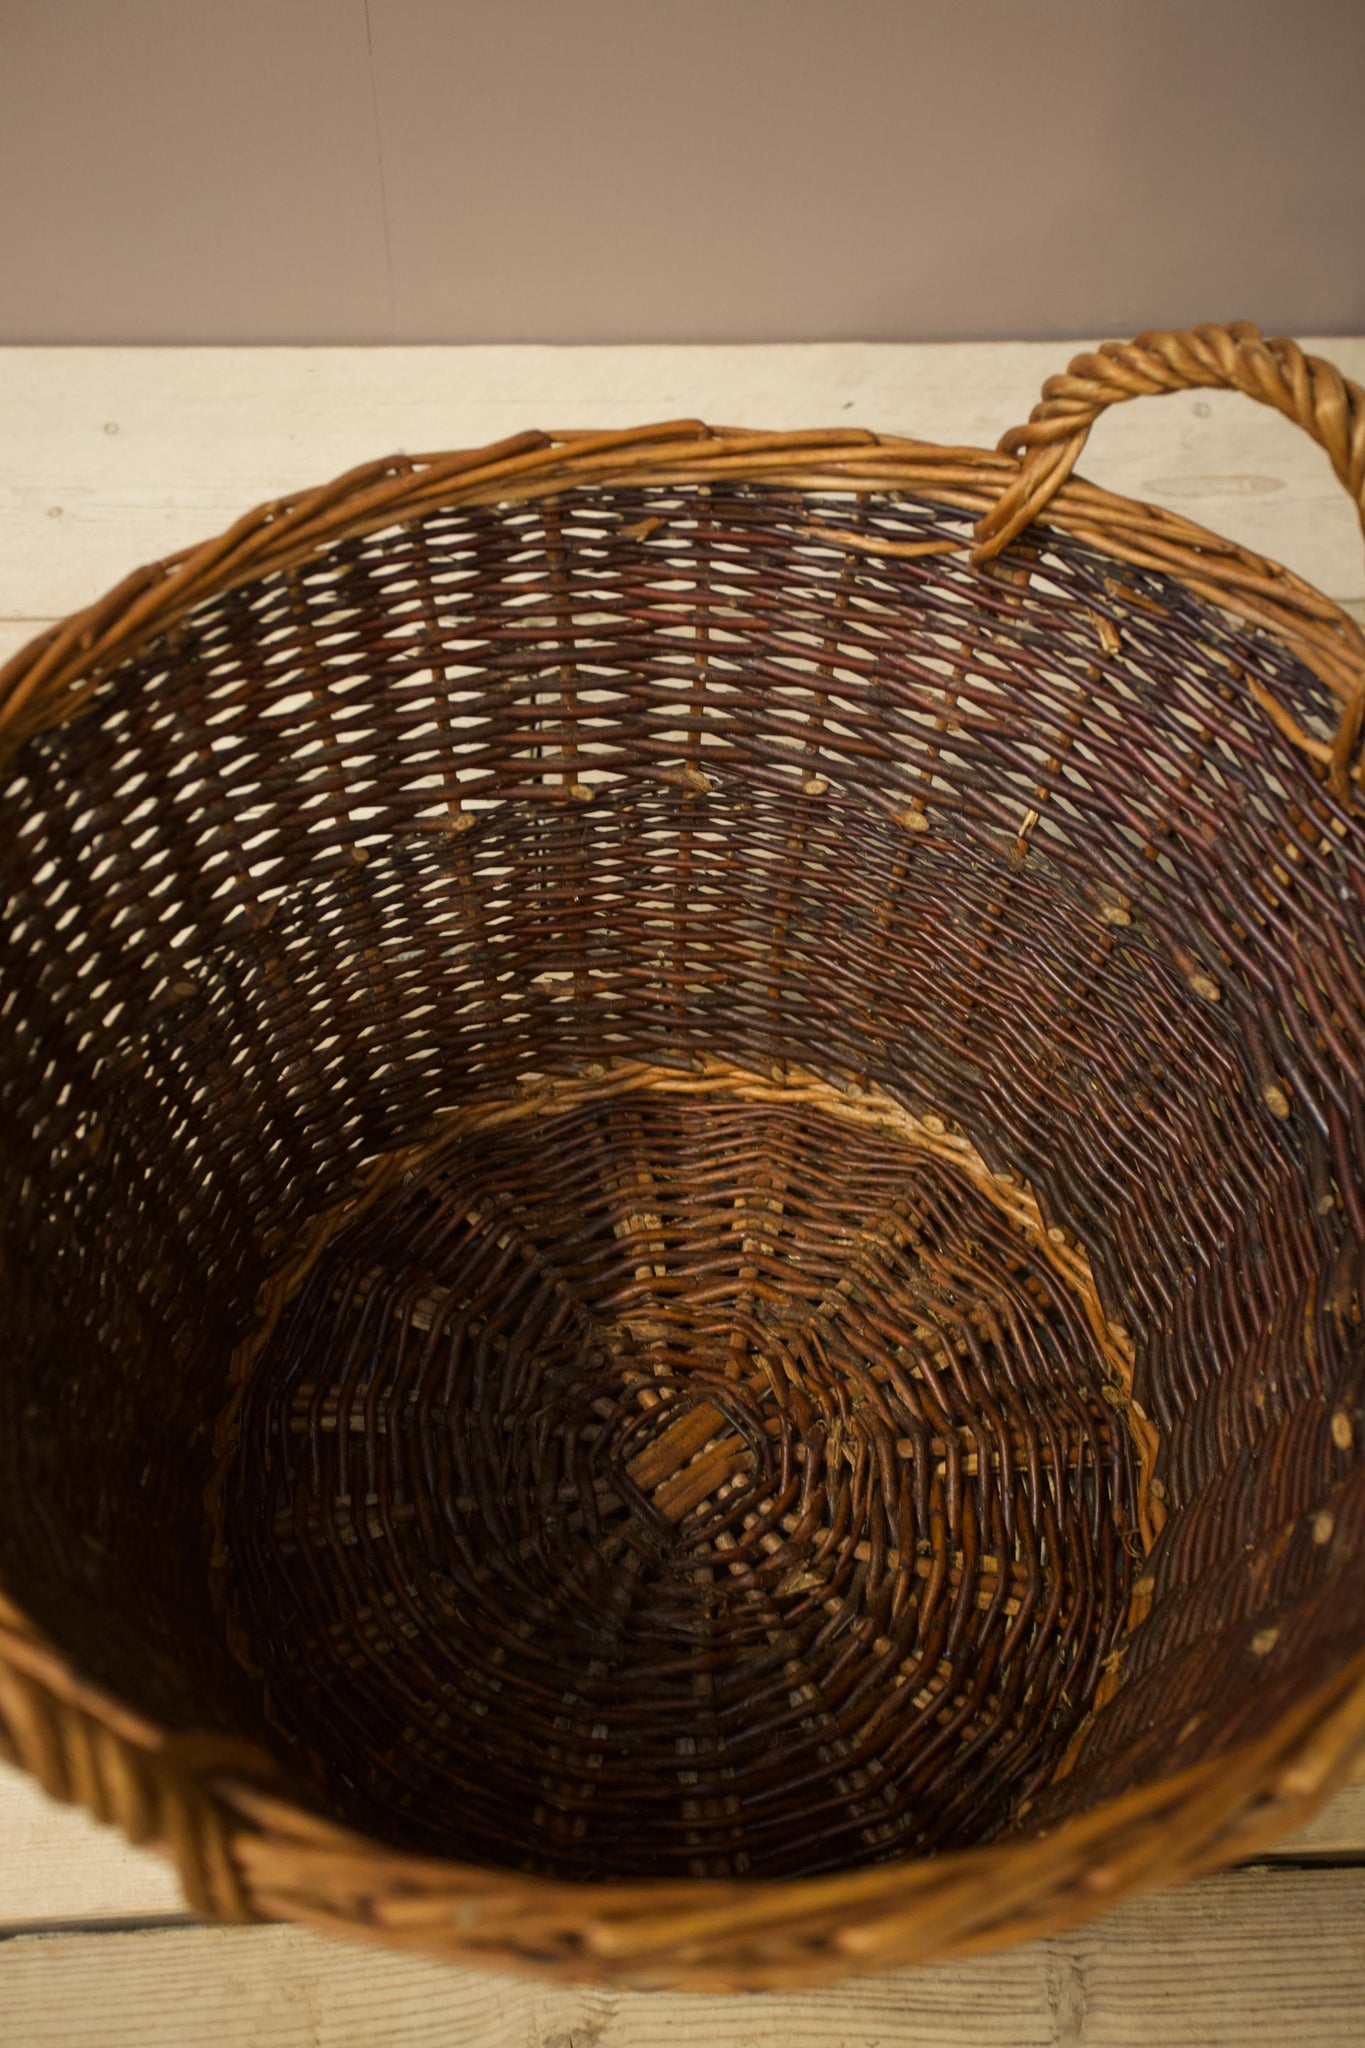 Vintage woven willow log baskets- Two tone